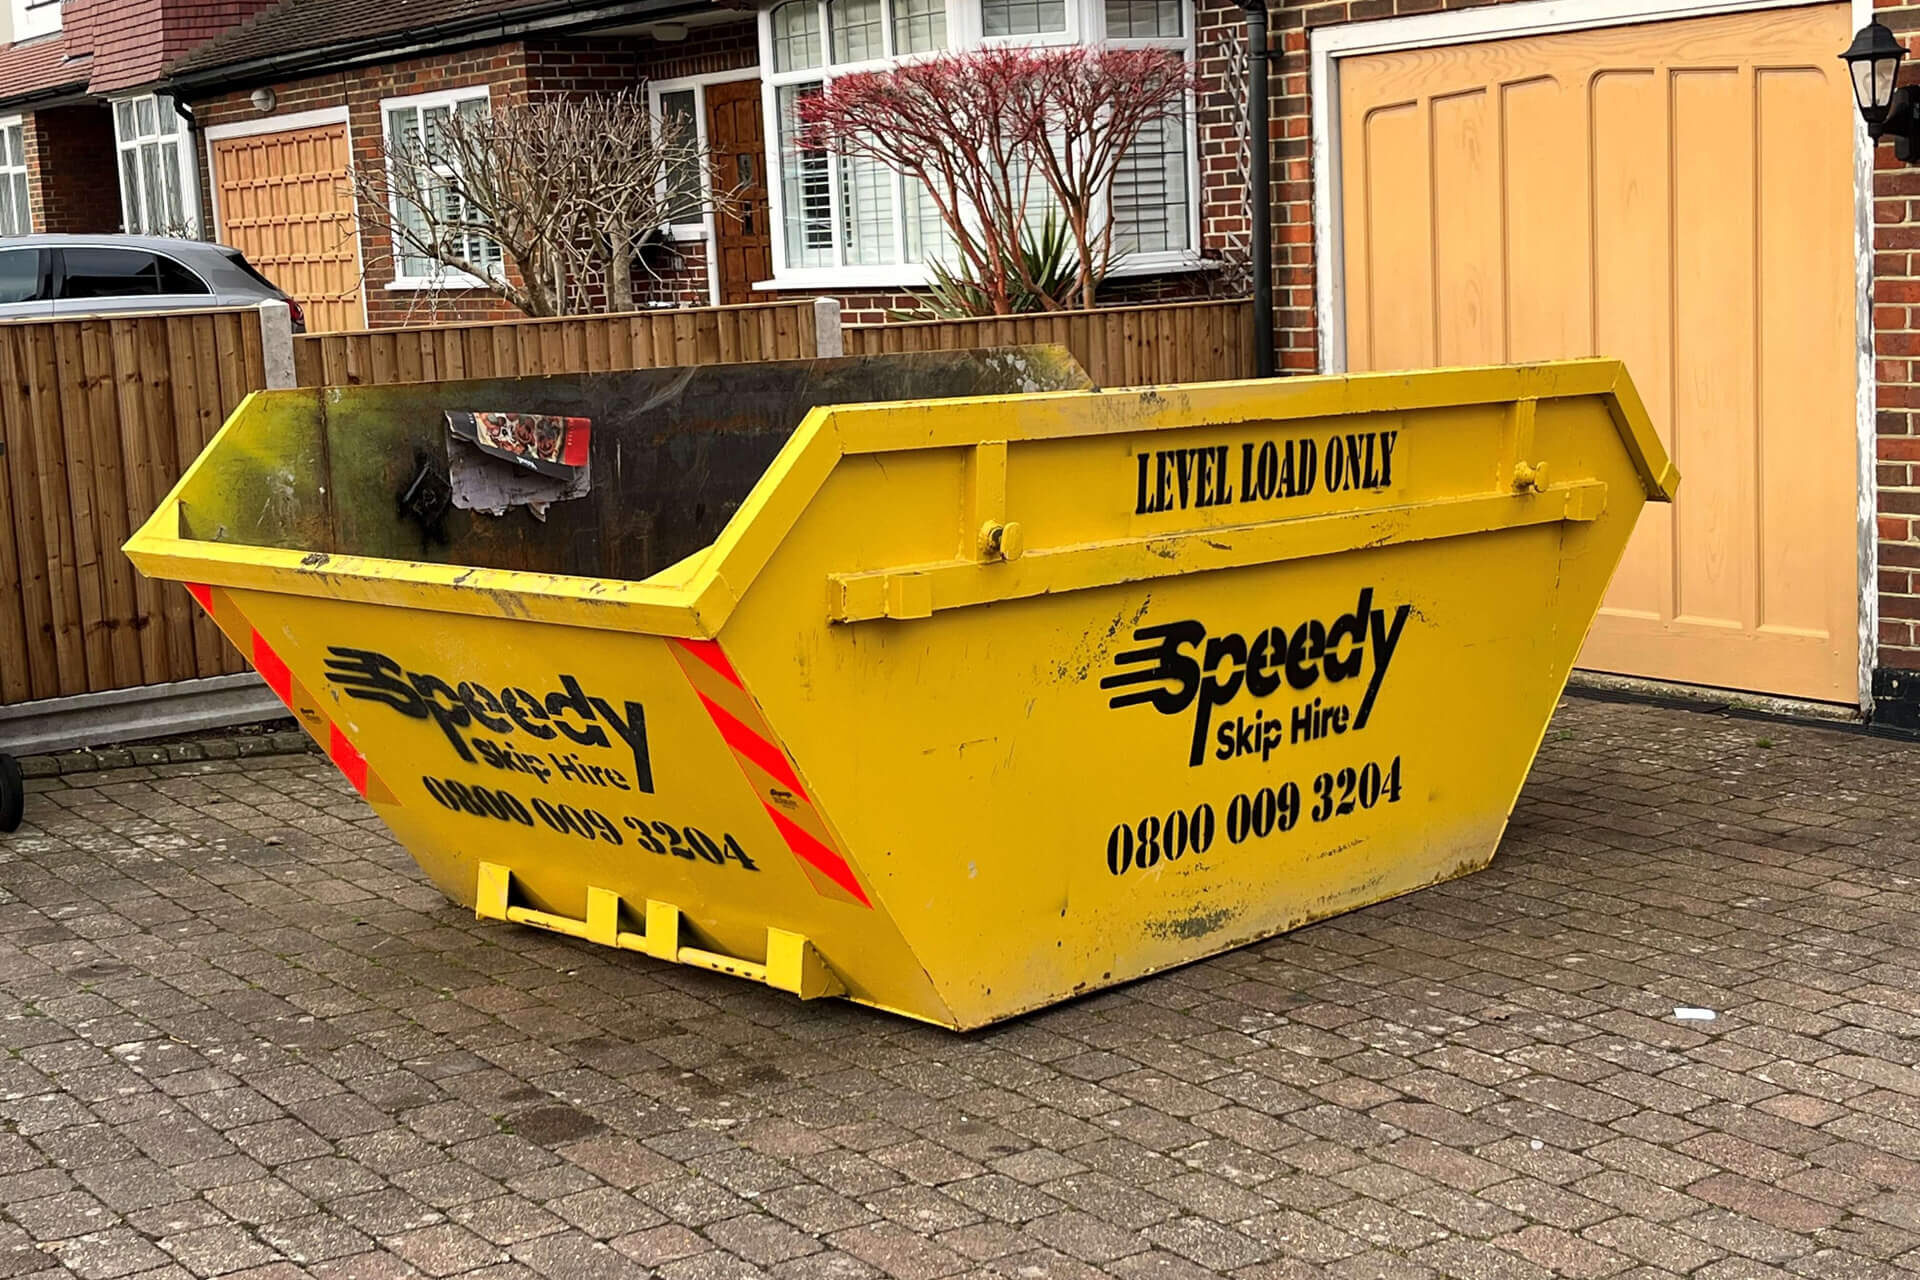 Local Skip Hire & Waste Clearance services in Surrey & Greater London